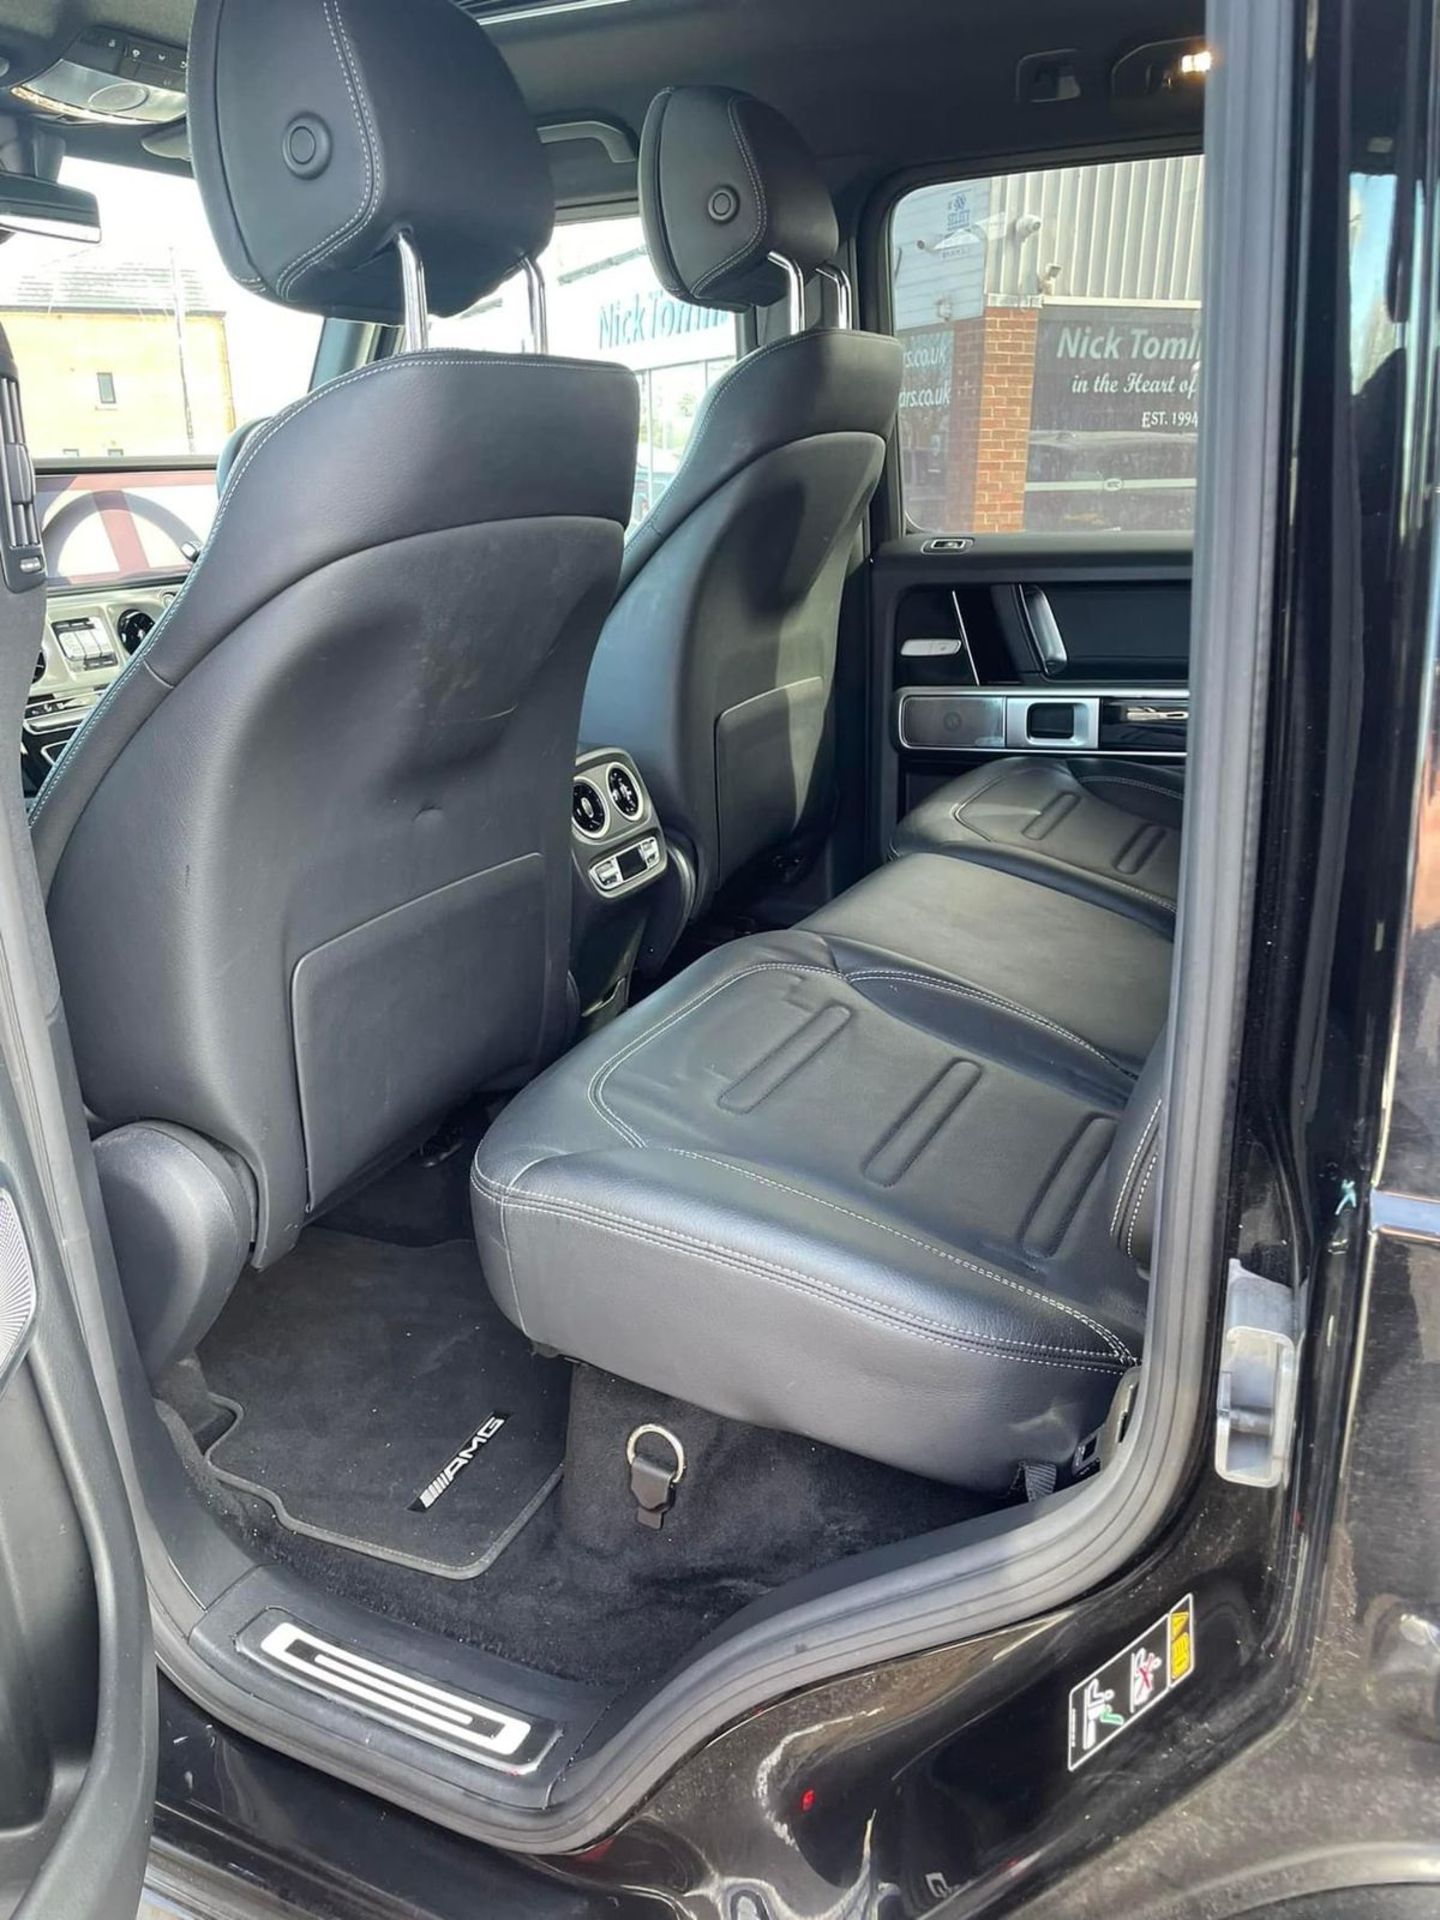 2019/19 REG MERCEDES-BENZ G350 AMG LINE PREMIUM D 4M AUTOMATIC, SHOWING 0 FORMER KEEPERS *PLUS VAT* - Image 9 of 9